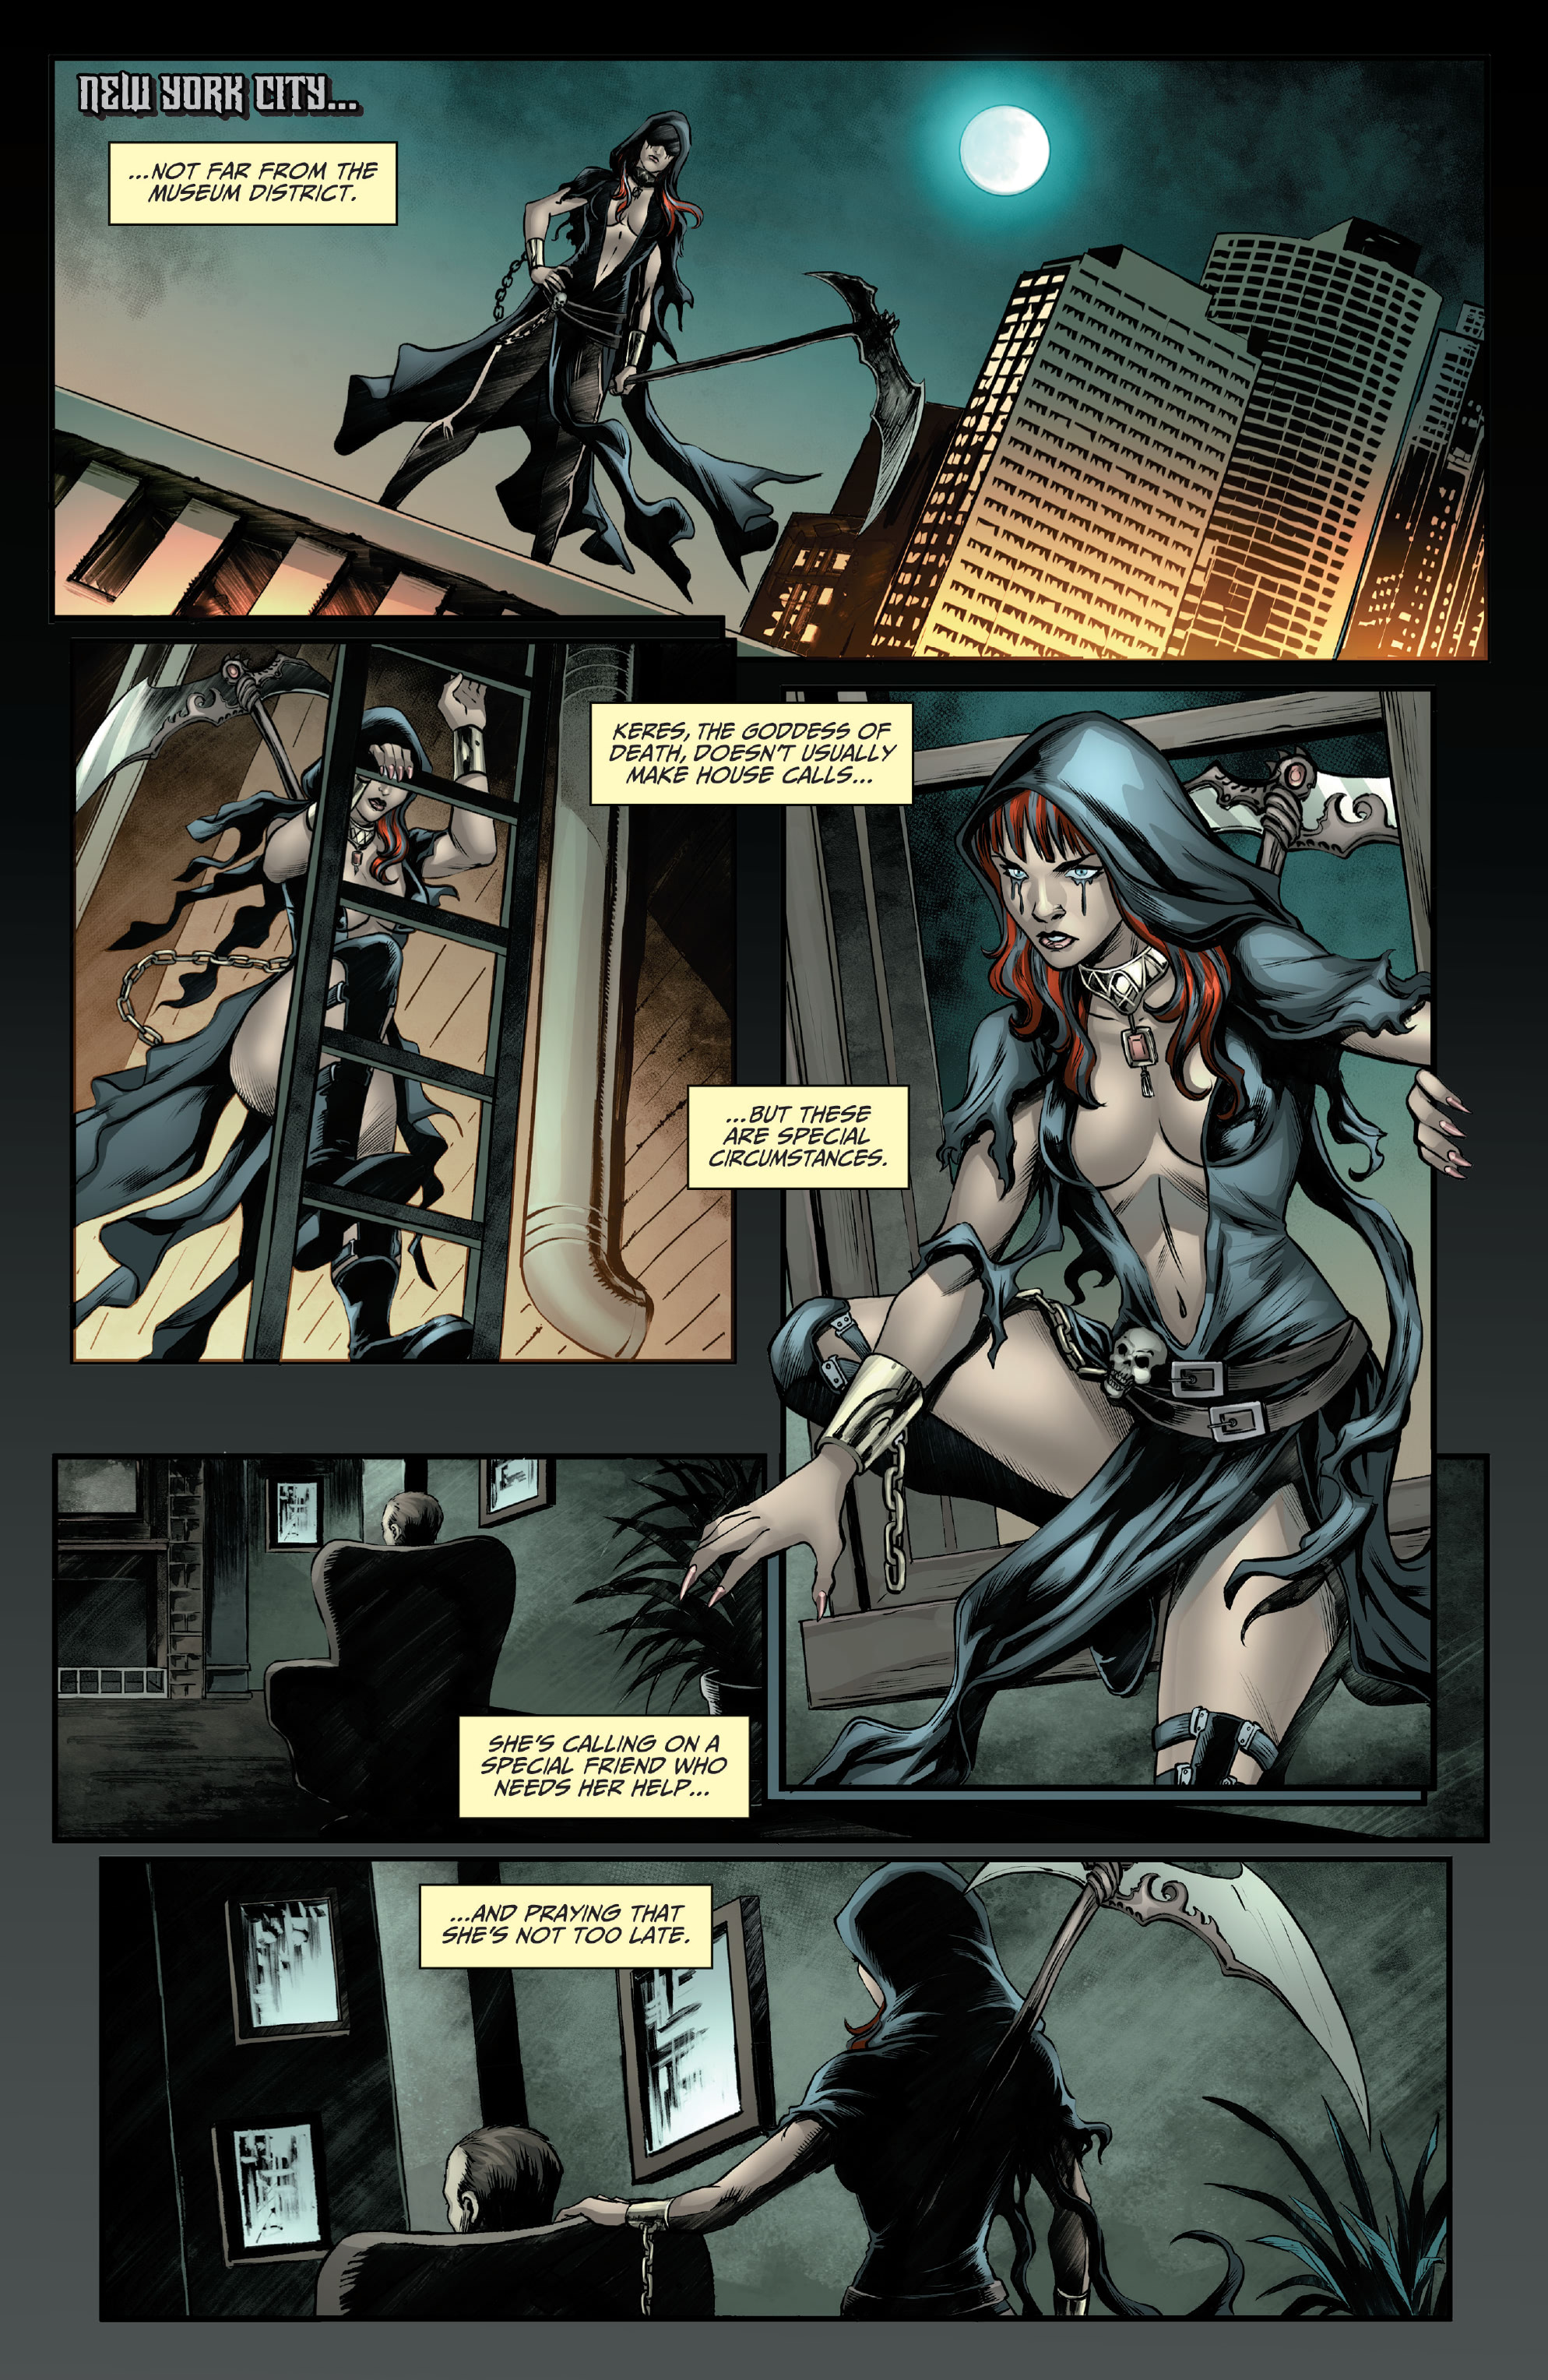 Grimm Tales of Terror Quarterly: Rise of Cthulhu (2022-): Chapter 1 - Page 3